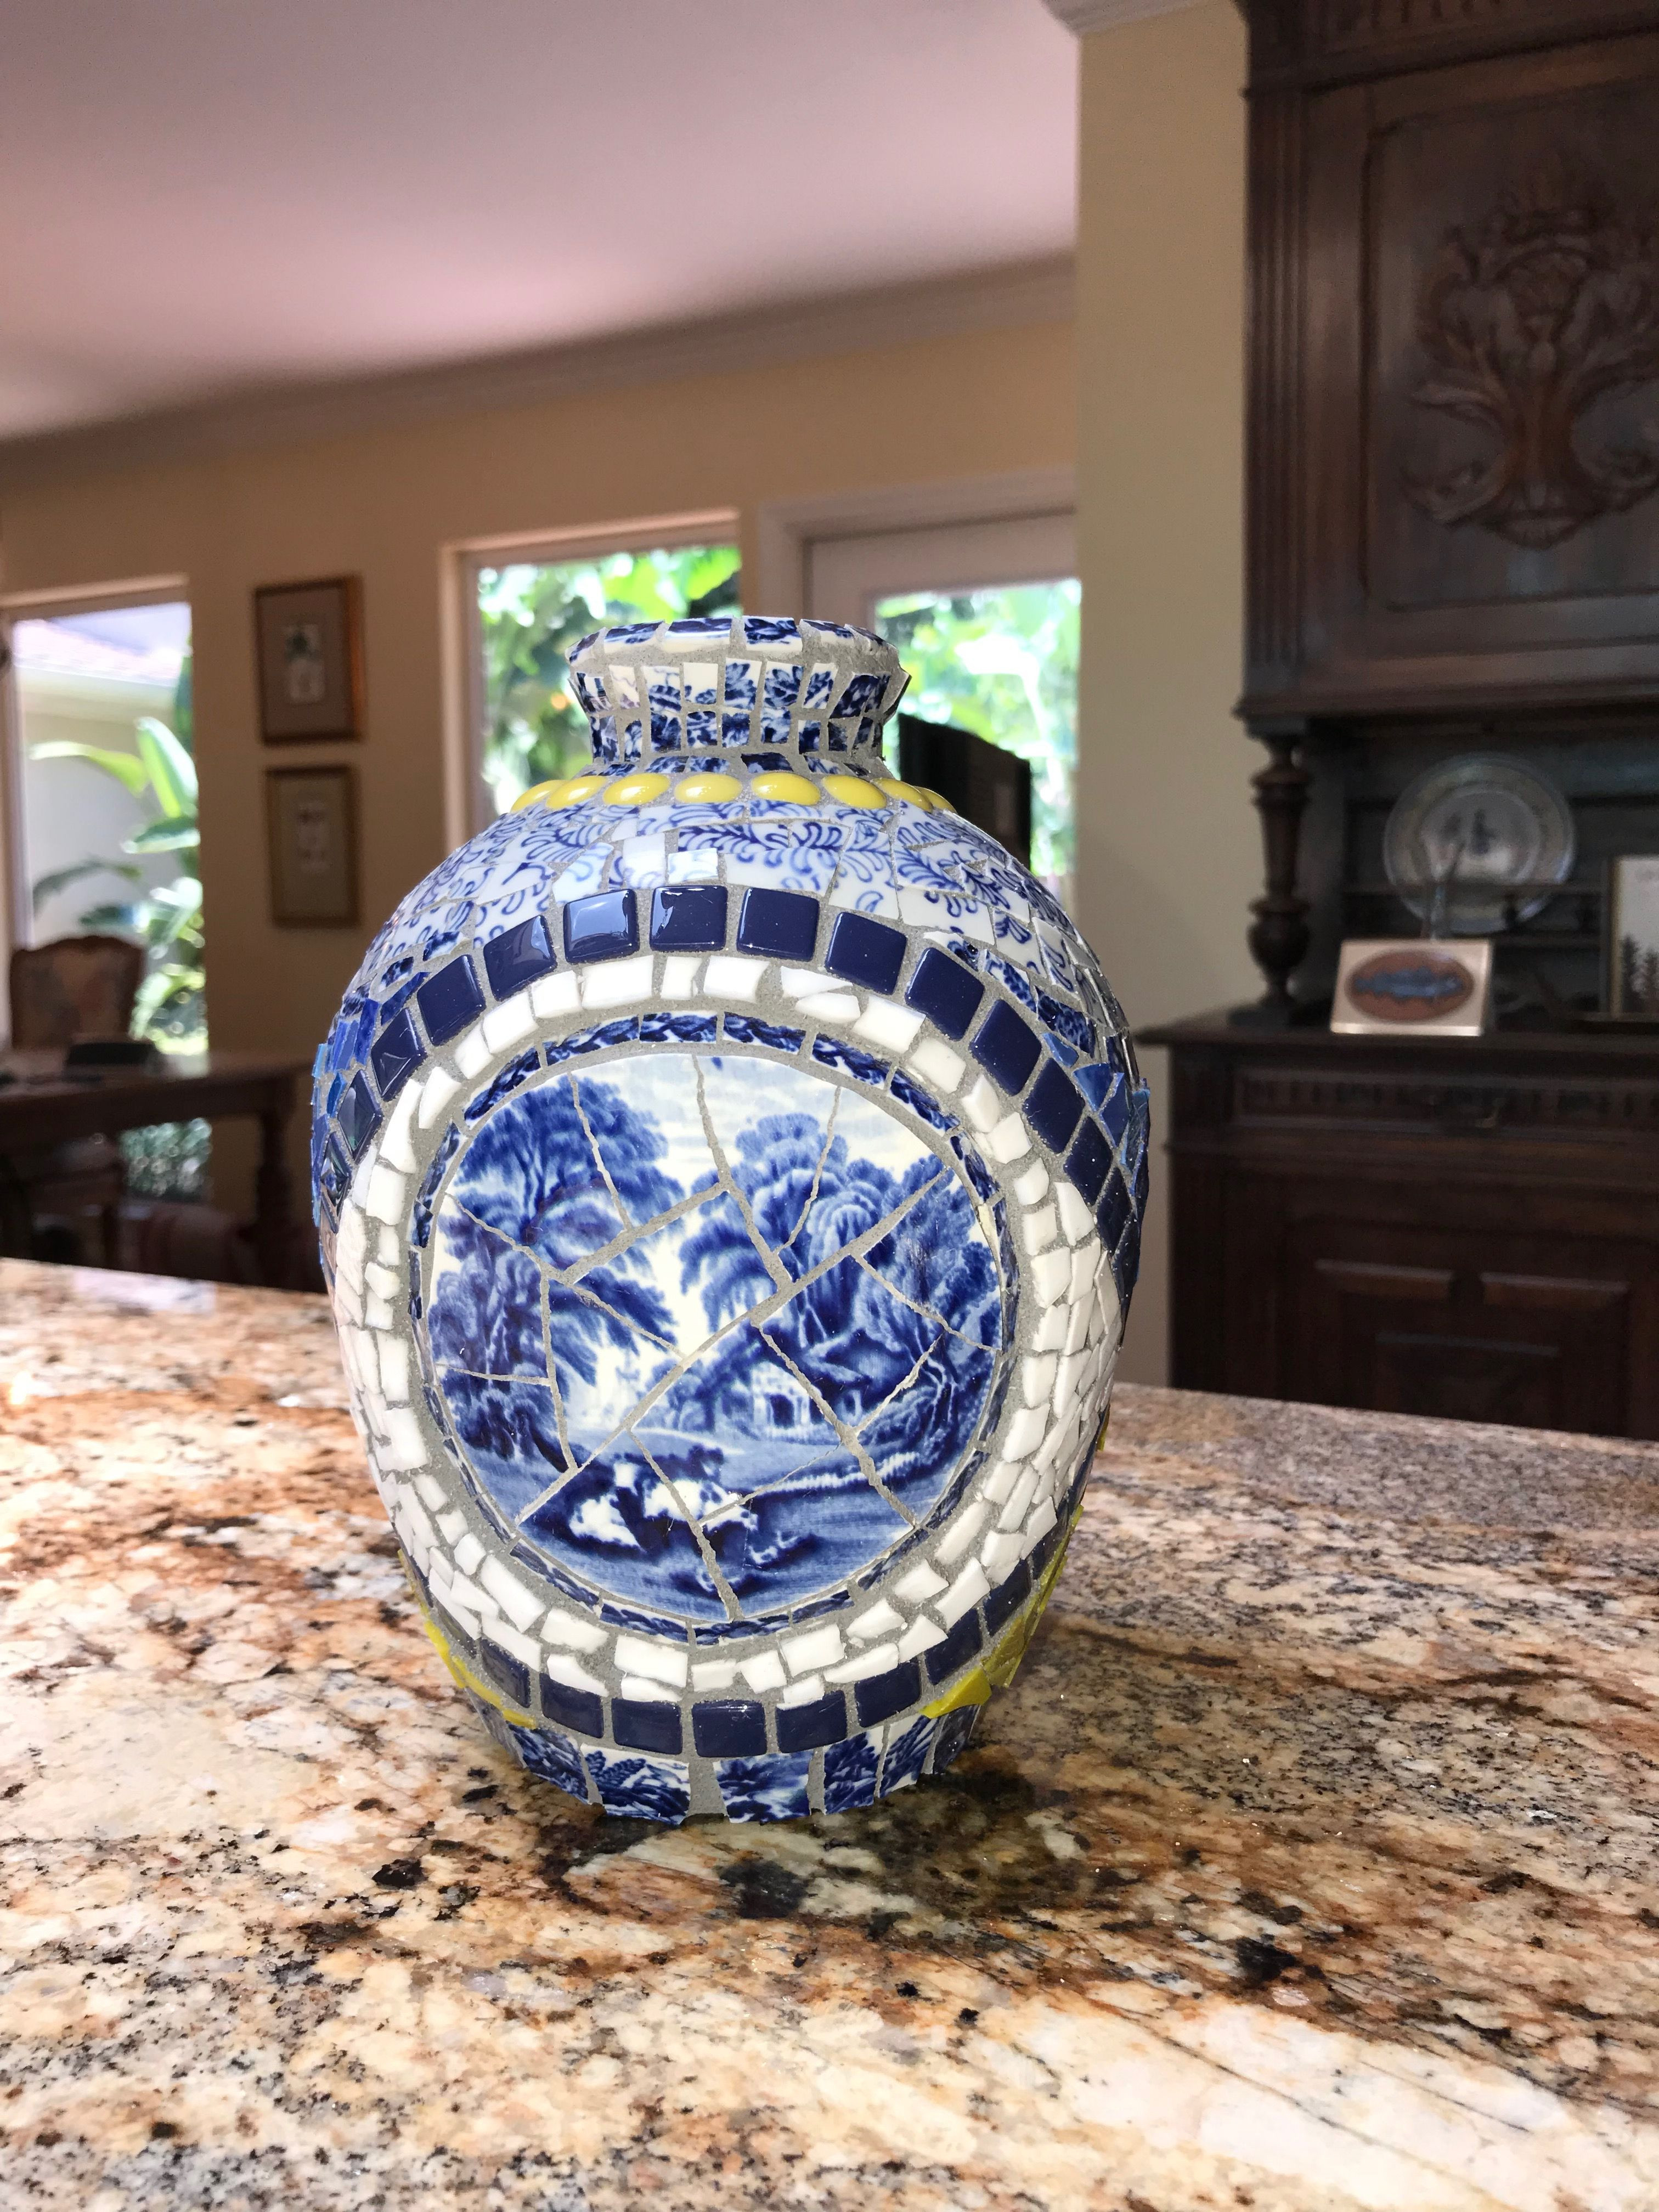 14 Elegant Mosaic Mirror Vase 2024 free download mosaic mirror vase of pin by michelle dubb on mosaic pots and vases pinterest mosaics for pin by michelle dubb on mosaic pots and vases pinterest mosaics mosaic vase and garden mosaics